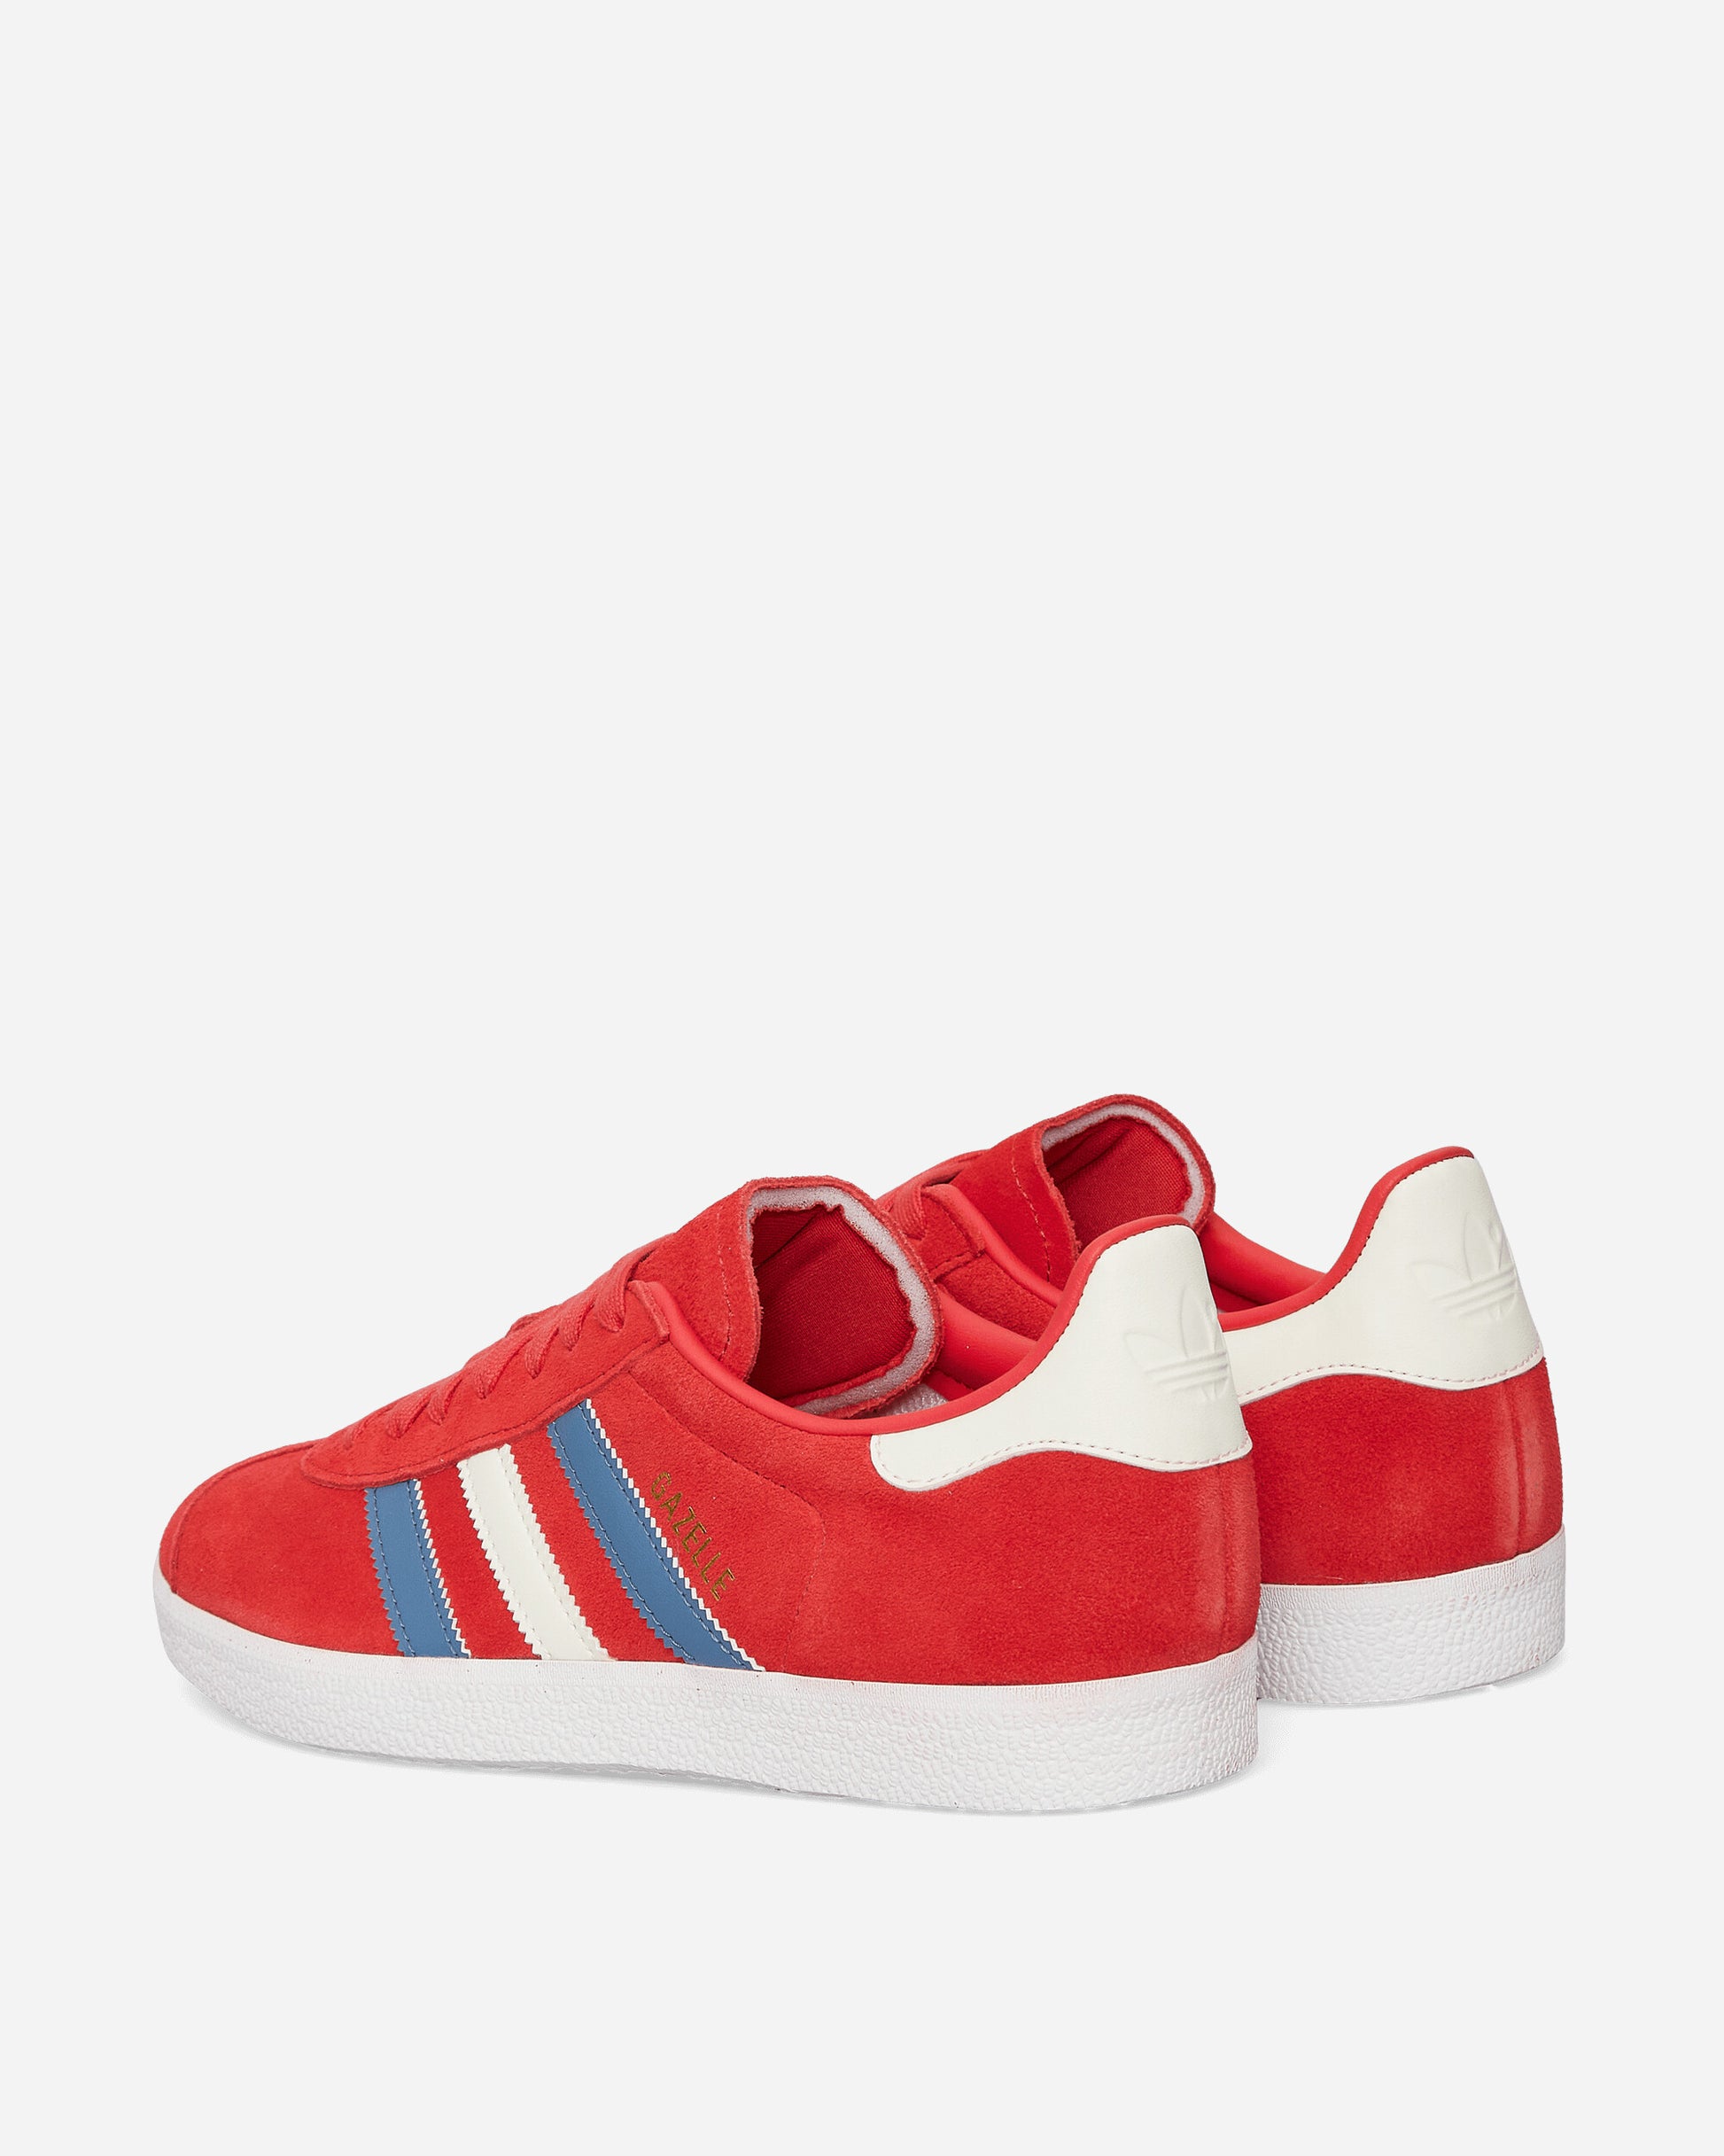 adidas Gazelle Glory Red/Altered Blue Sneakers Low IF6827 001